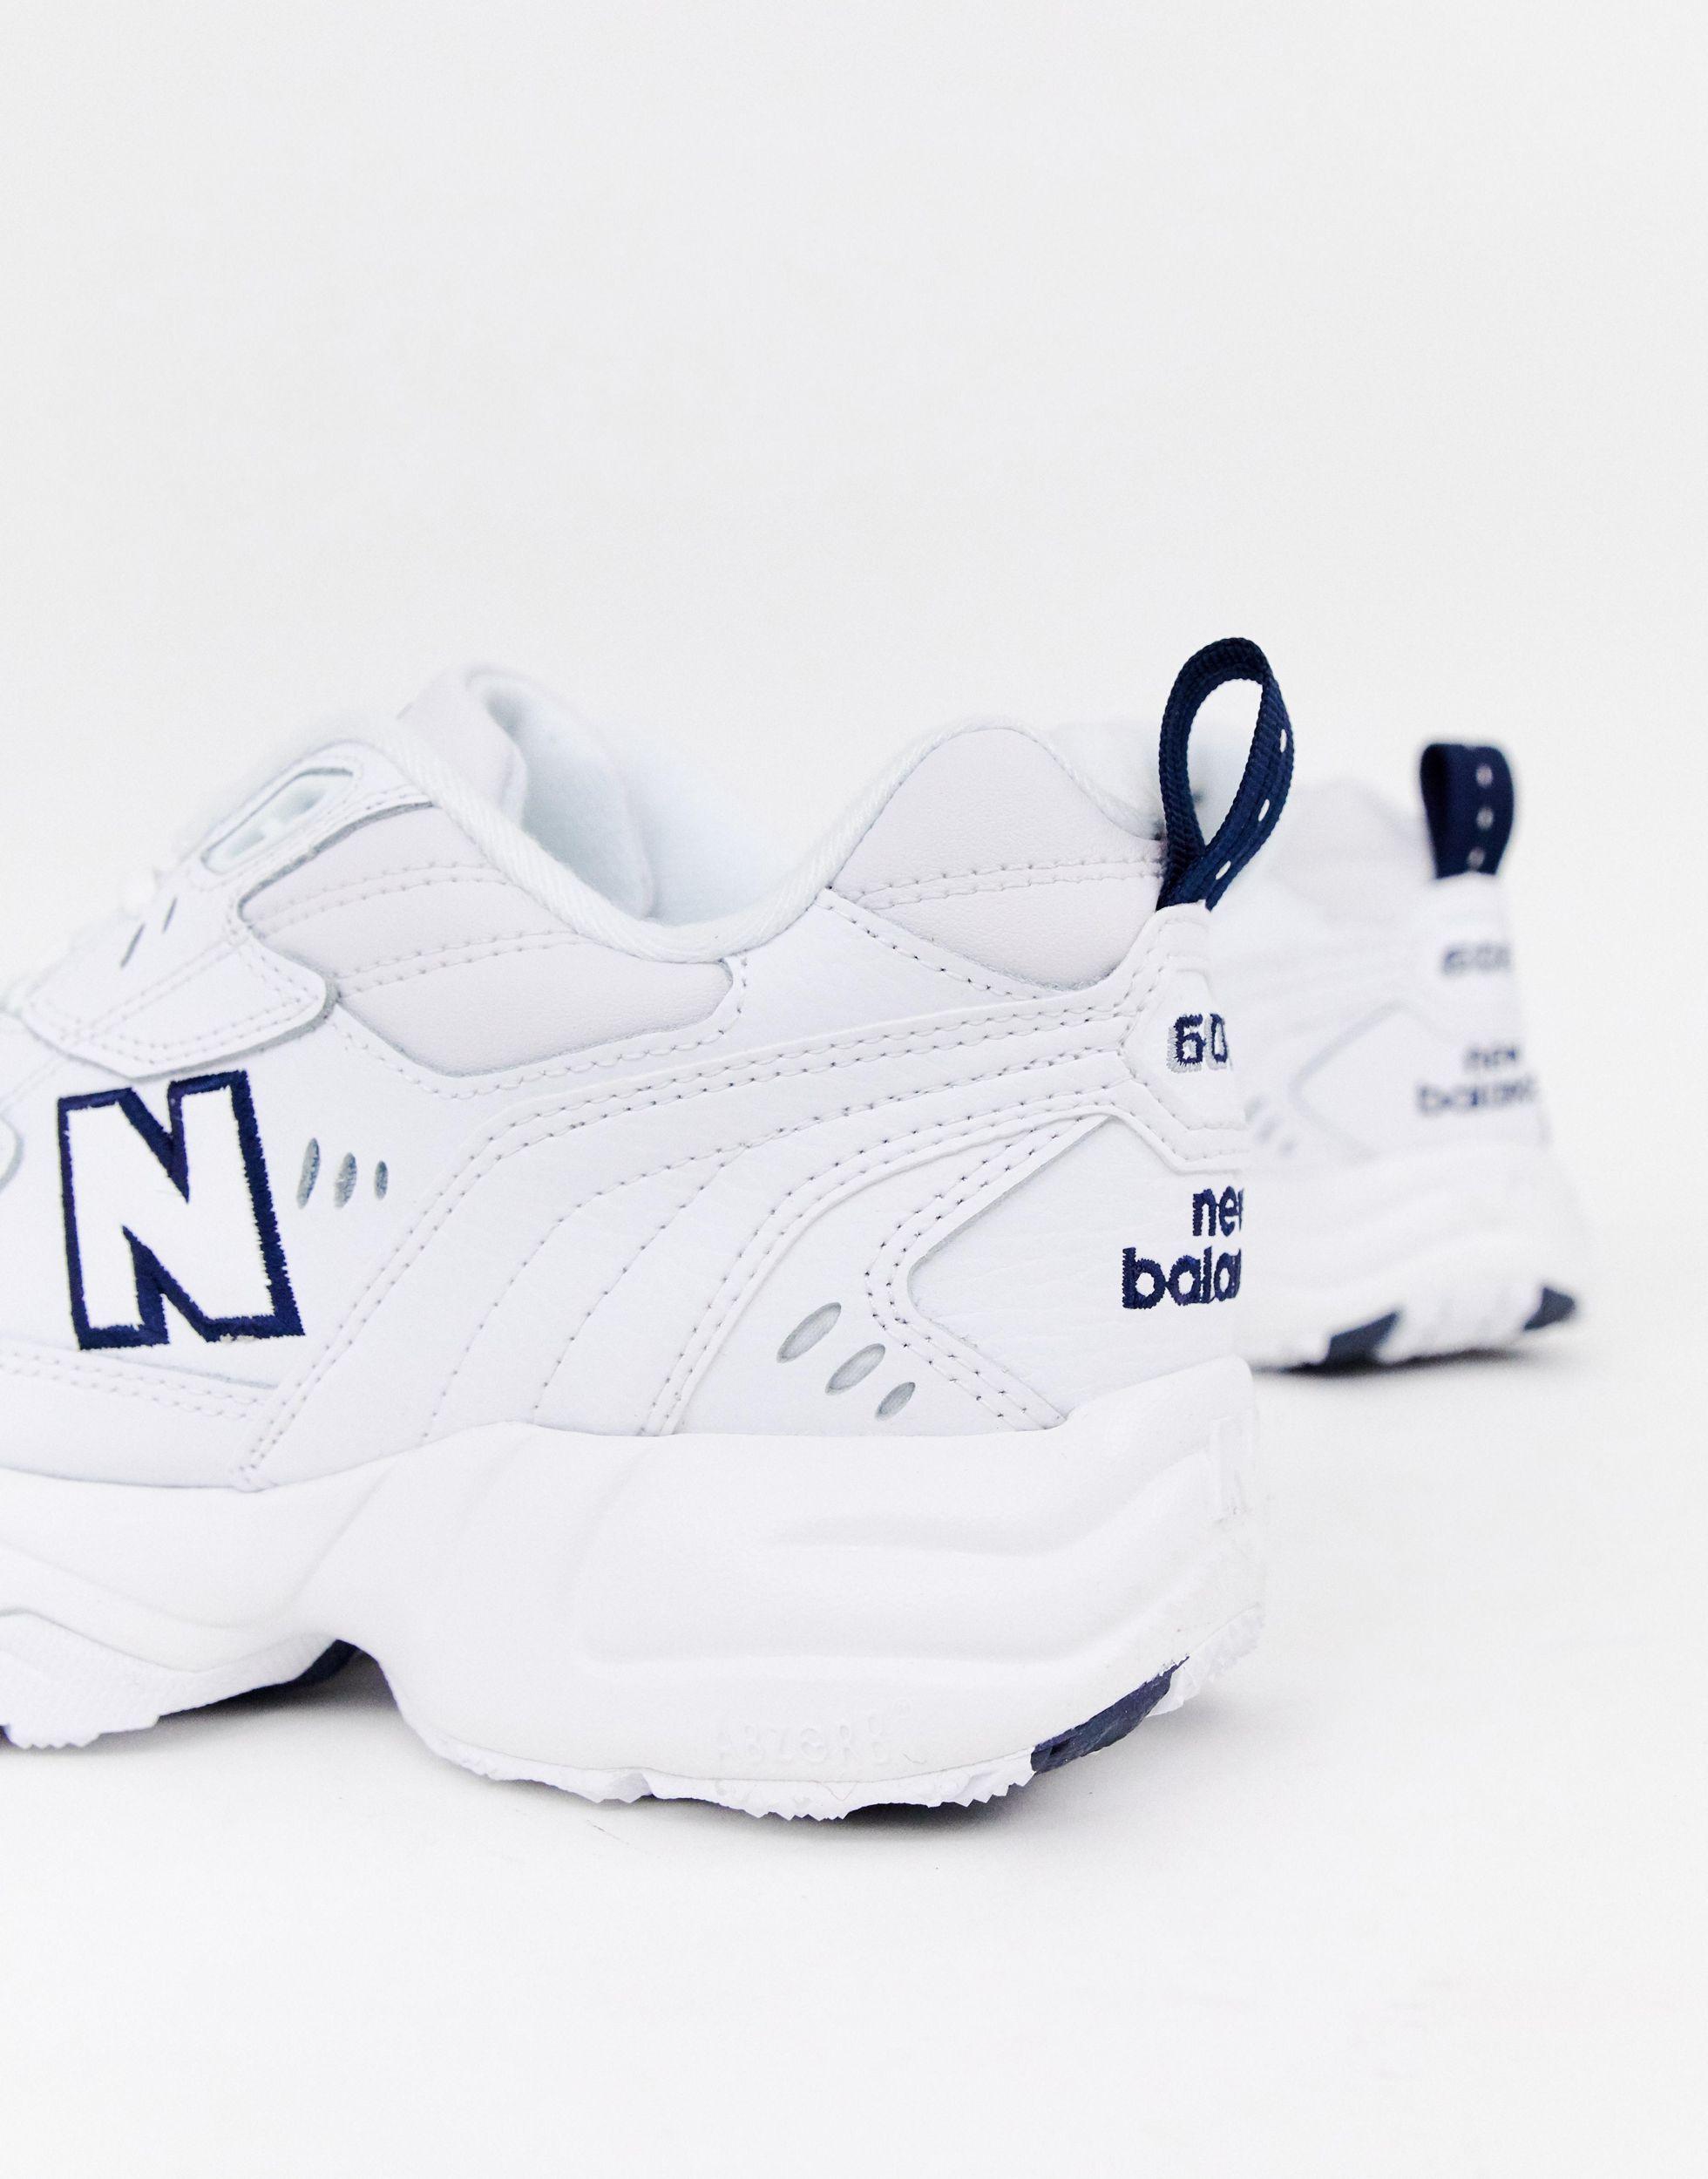 New Balance 608 Blanche Homme Discount Outlet, Save 62% | idiomas.to ...